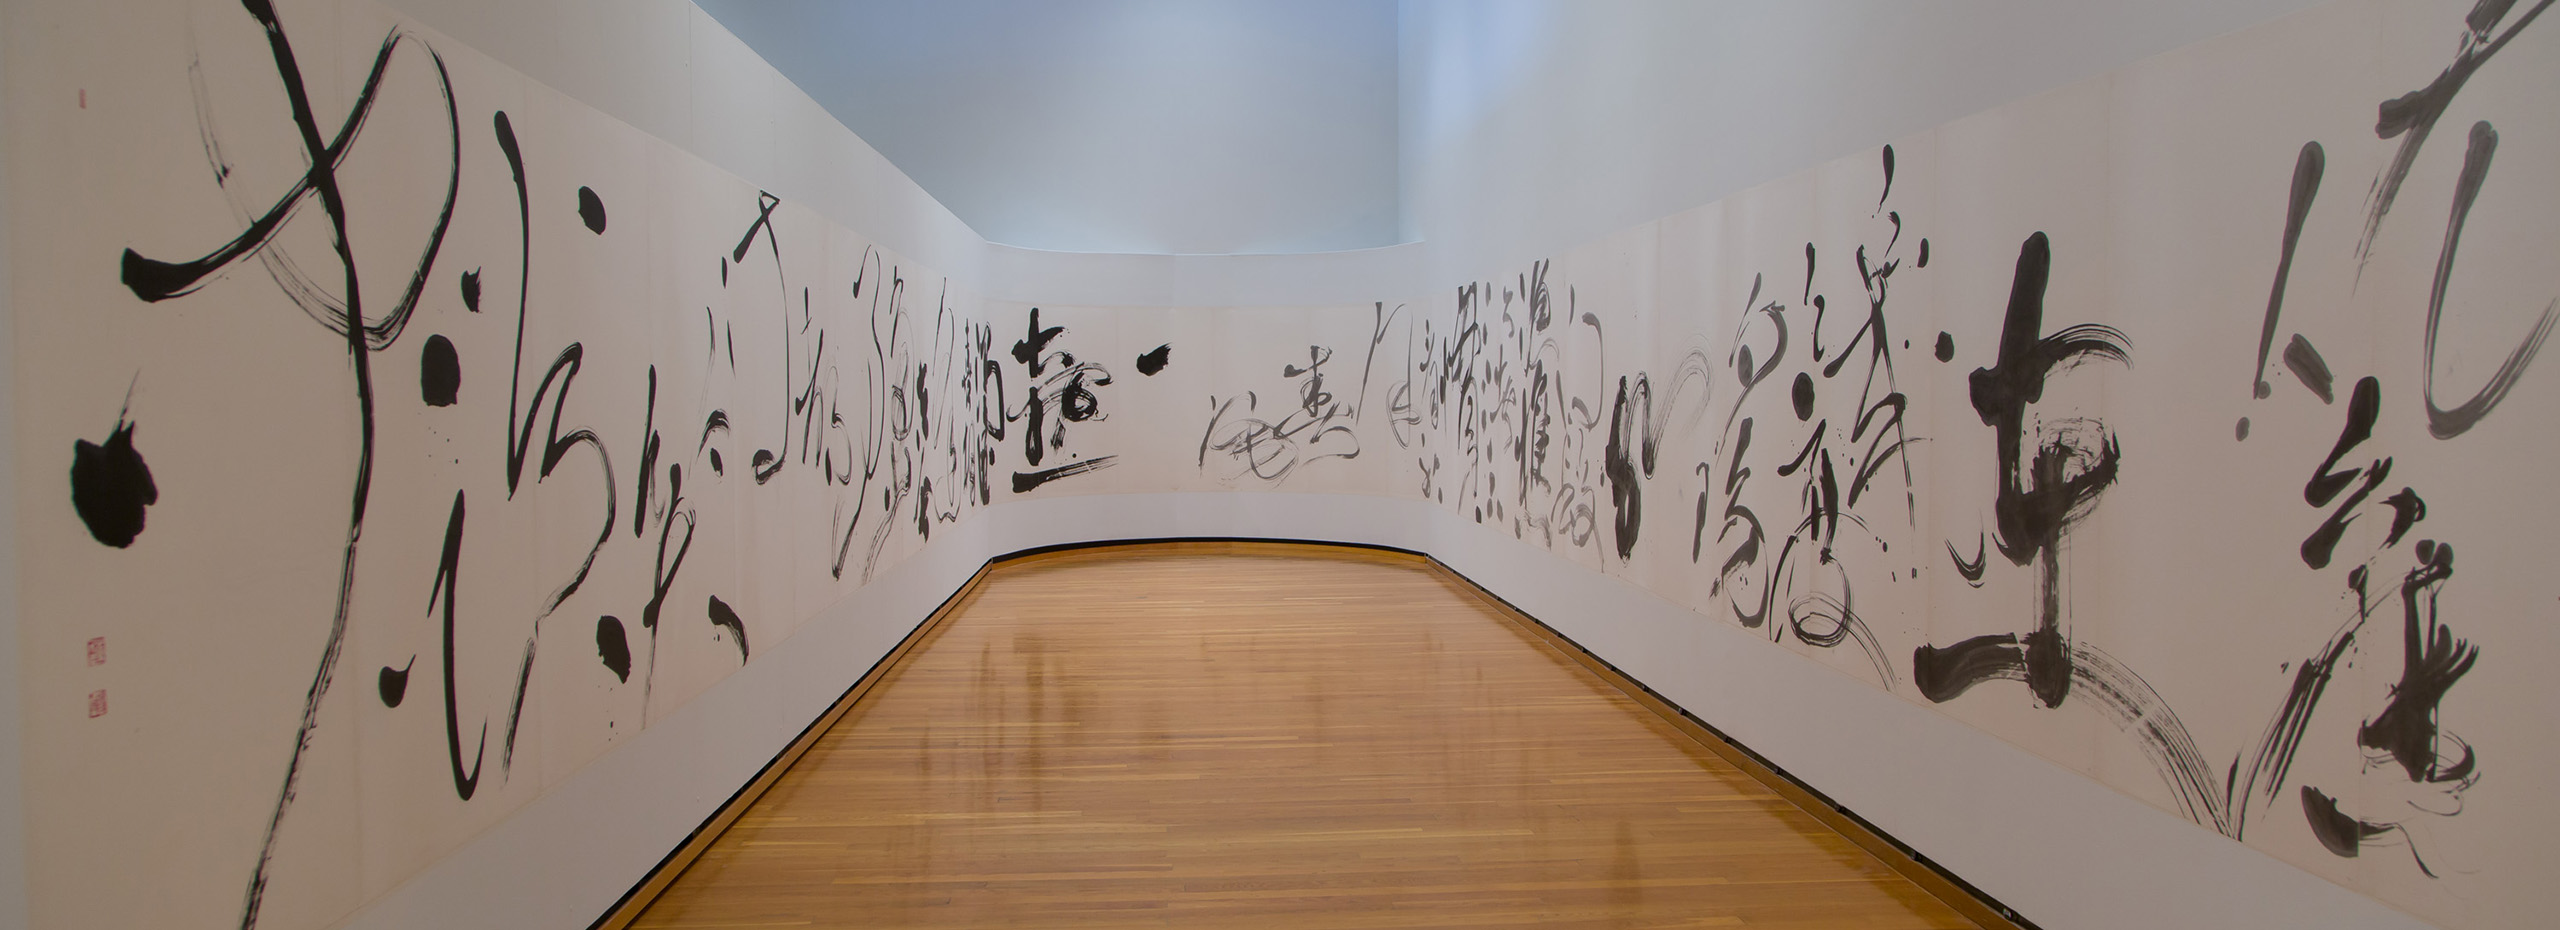 A large Chinese calligraphic scroll wraps around a U shaped gallery wall